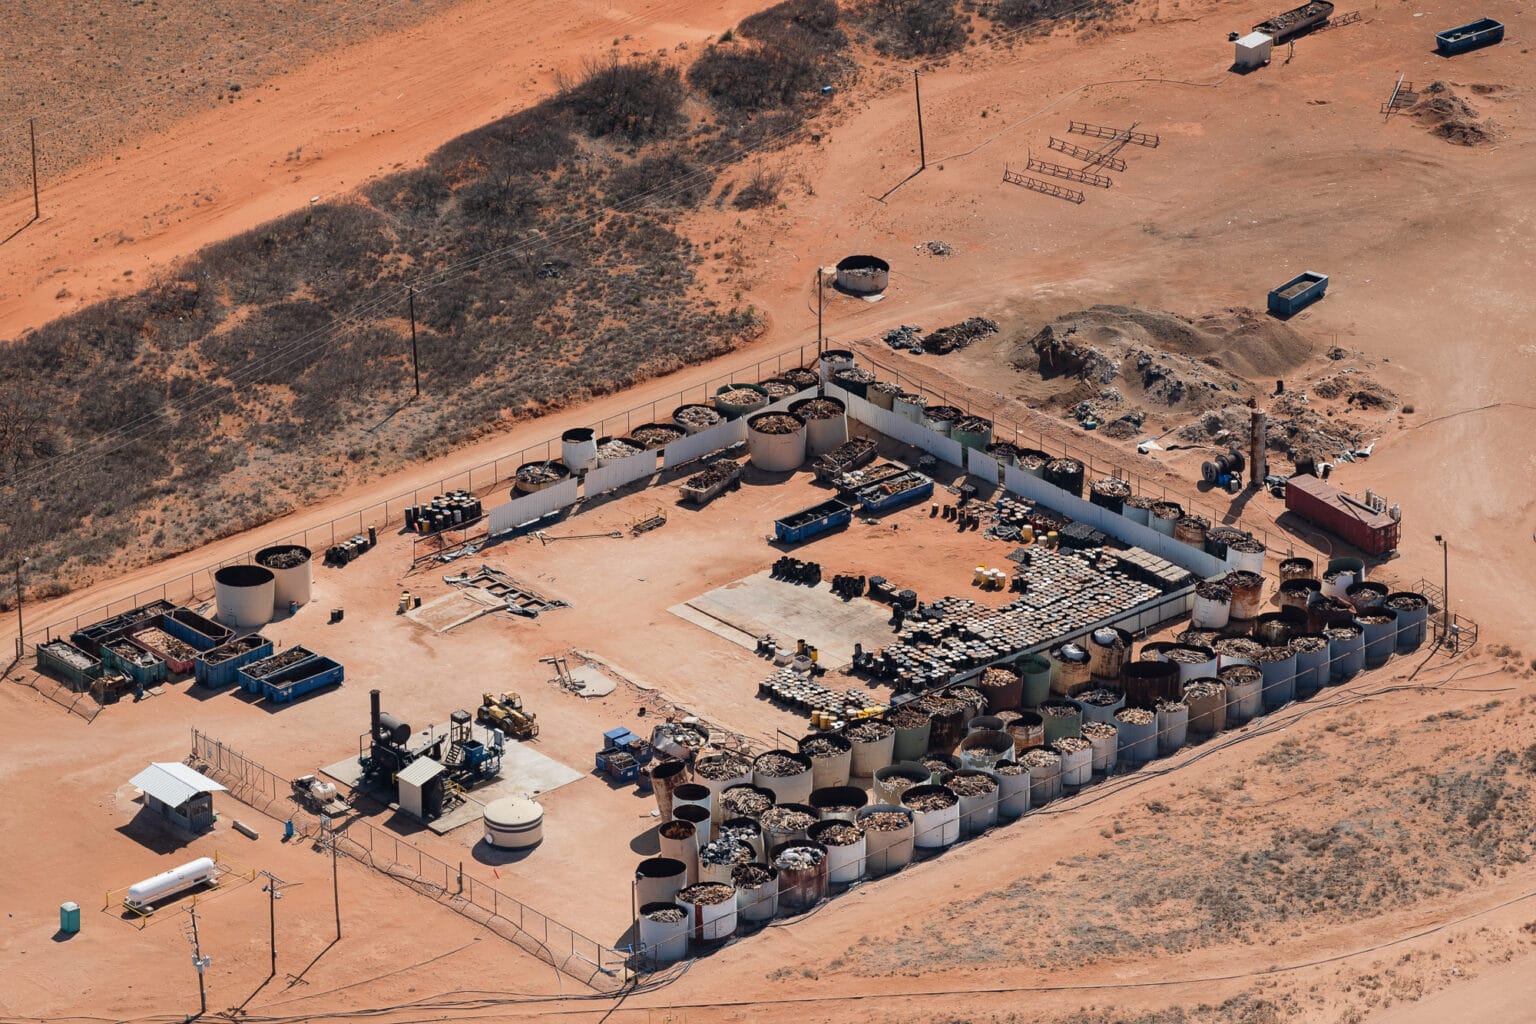 Aerial view of industrial site with dozens of open tanks holding oilfield pipe and other waste and barrels stacked up in the desert.